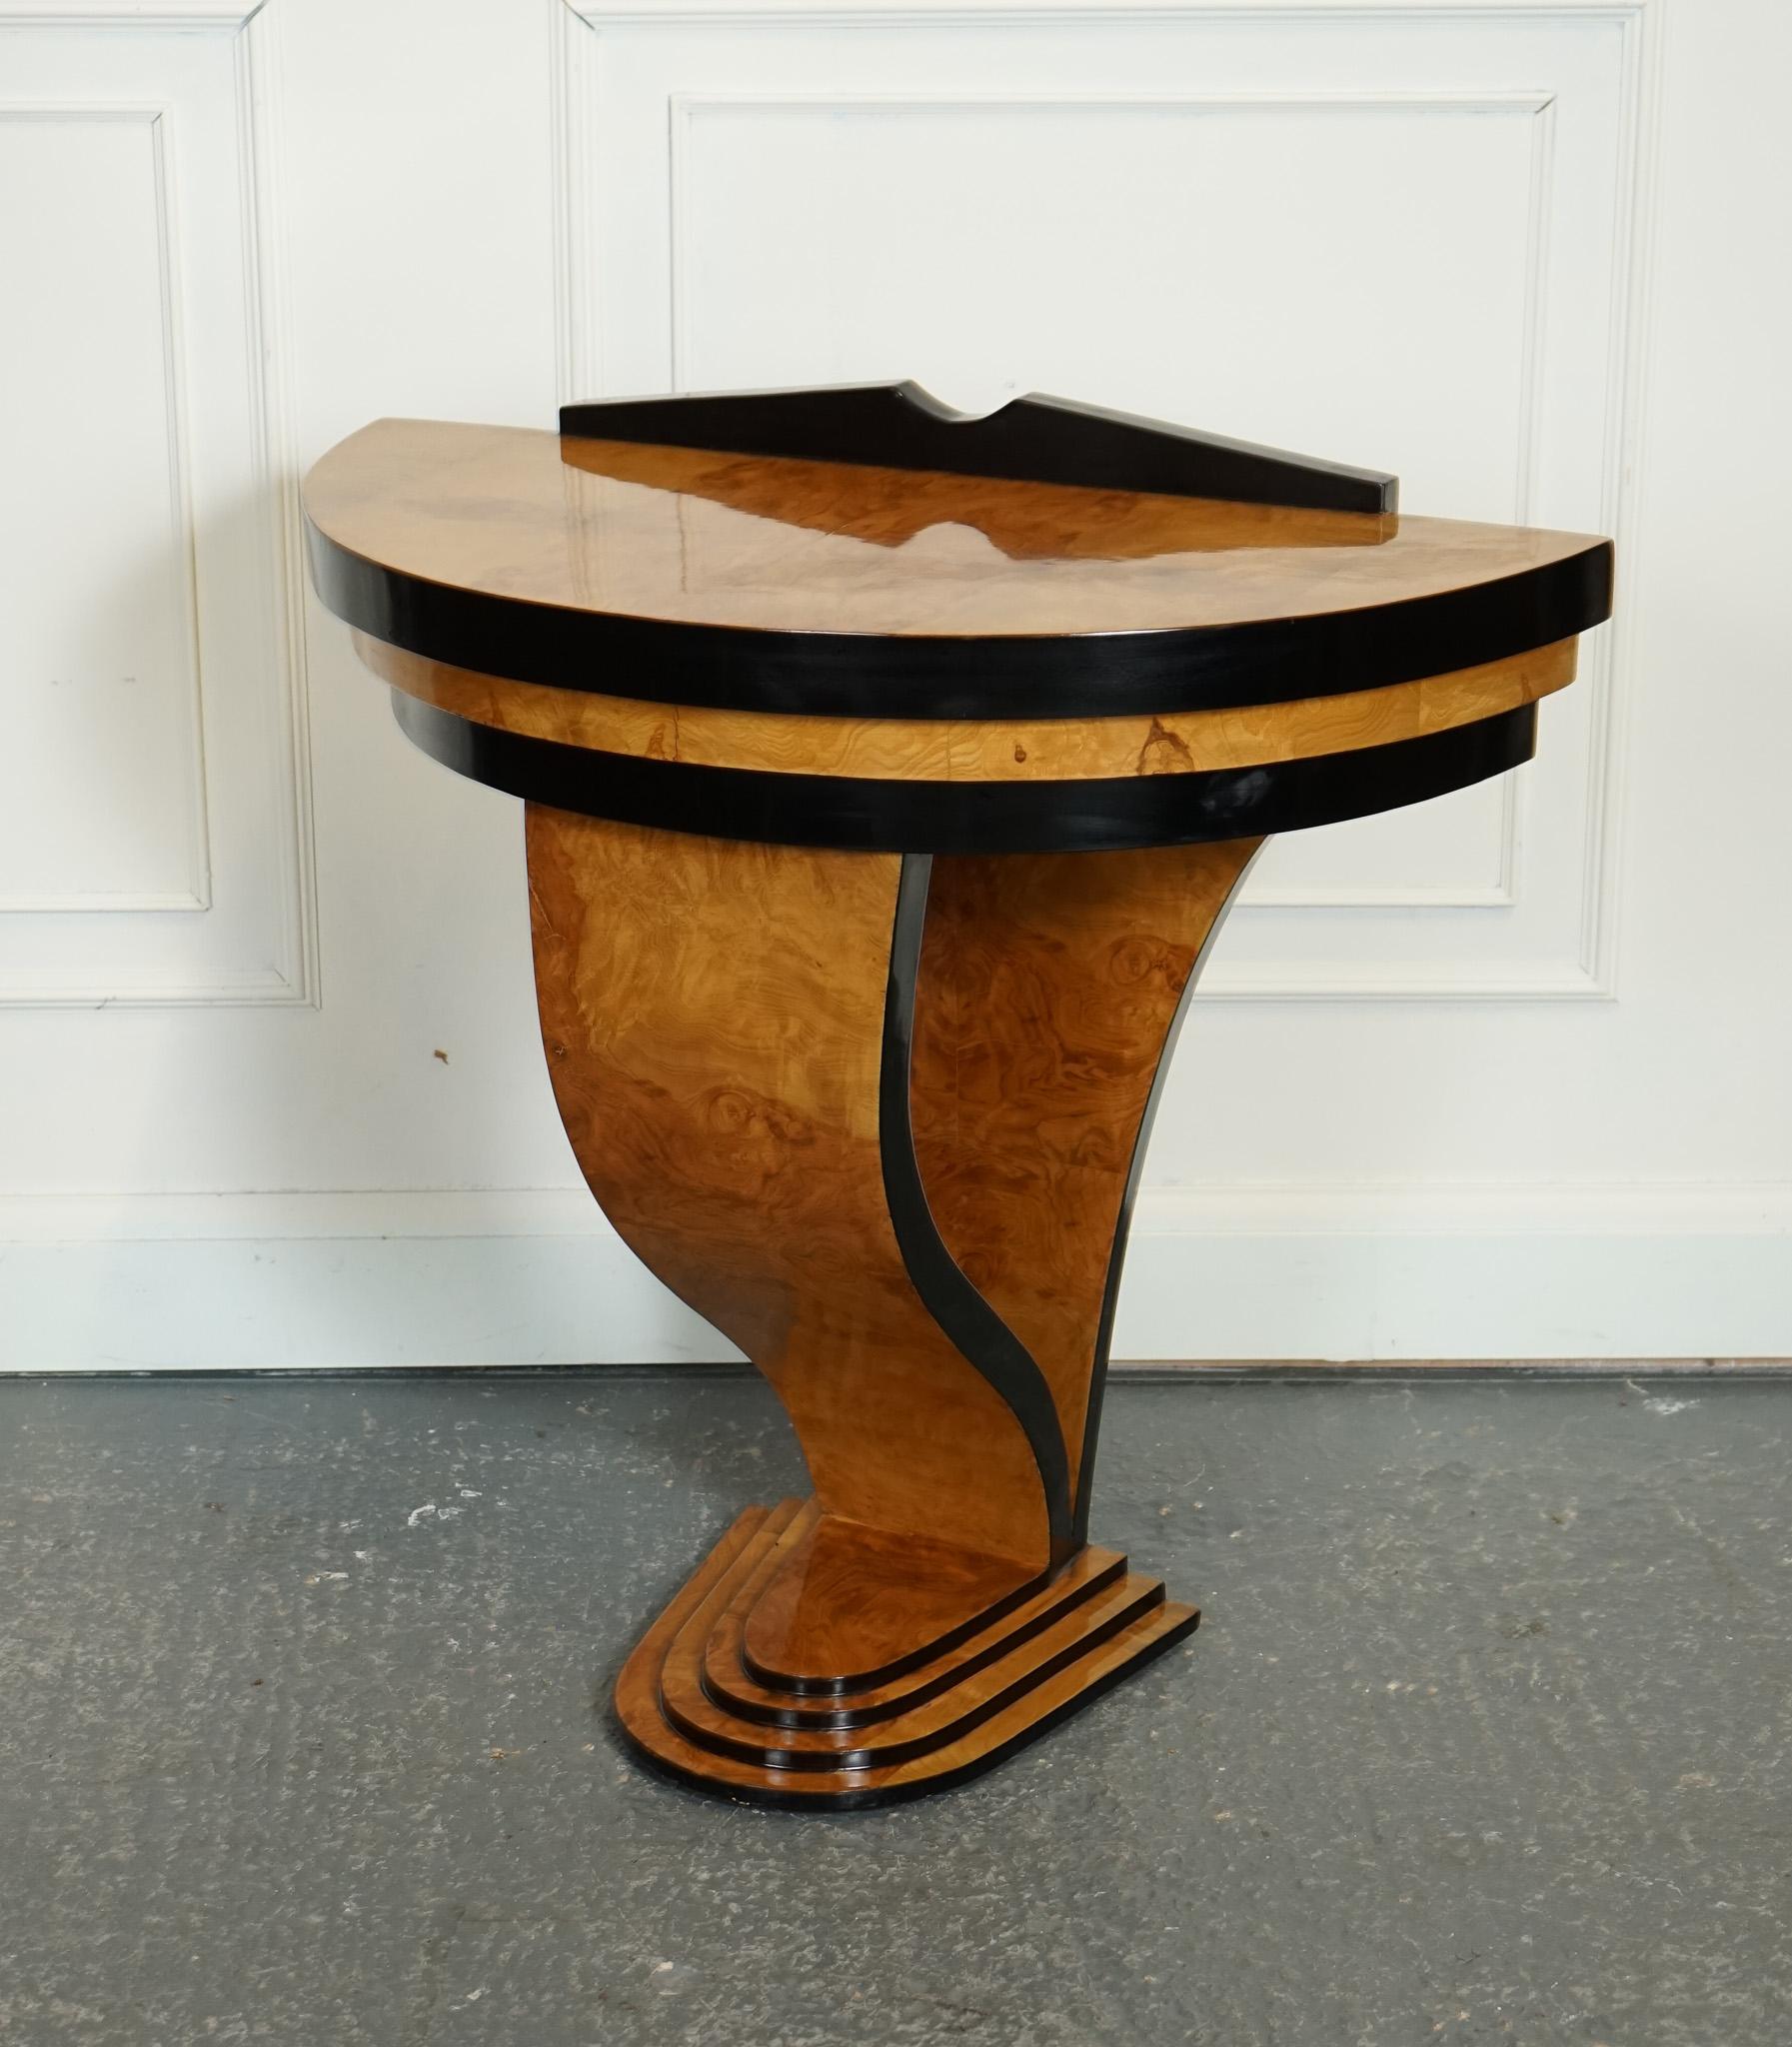 
We are delighted to offer for sale this Ebonised Art Deco Style Burr Walnut.

The Art Deco Burr Walnut with Black Trim Demi Lune Console Hall Table is a stunning piece of furniture that embodies the sleek and glamorous style of the Art Deco era.